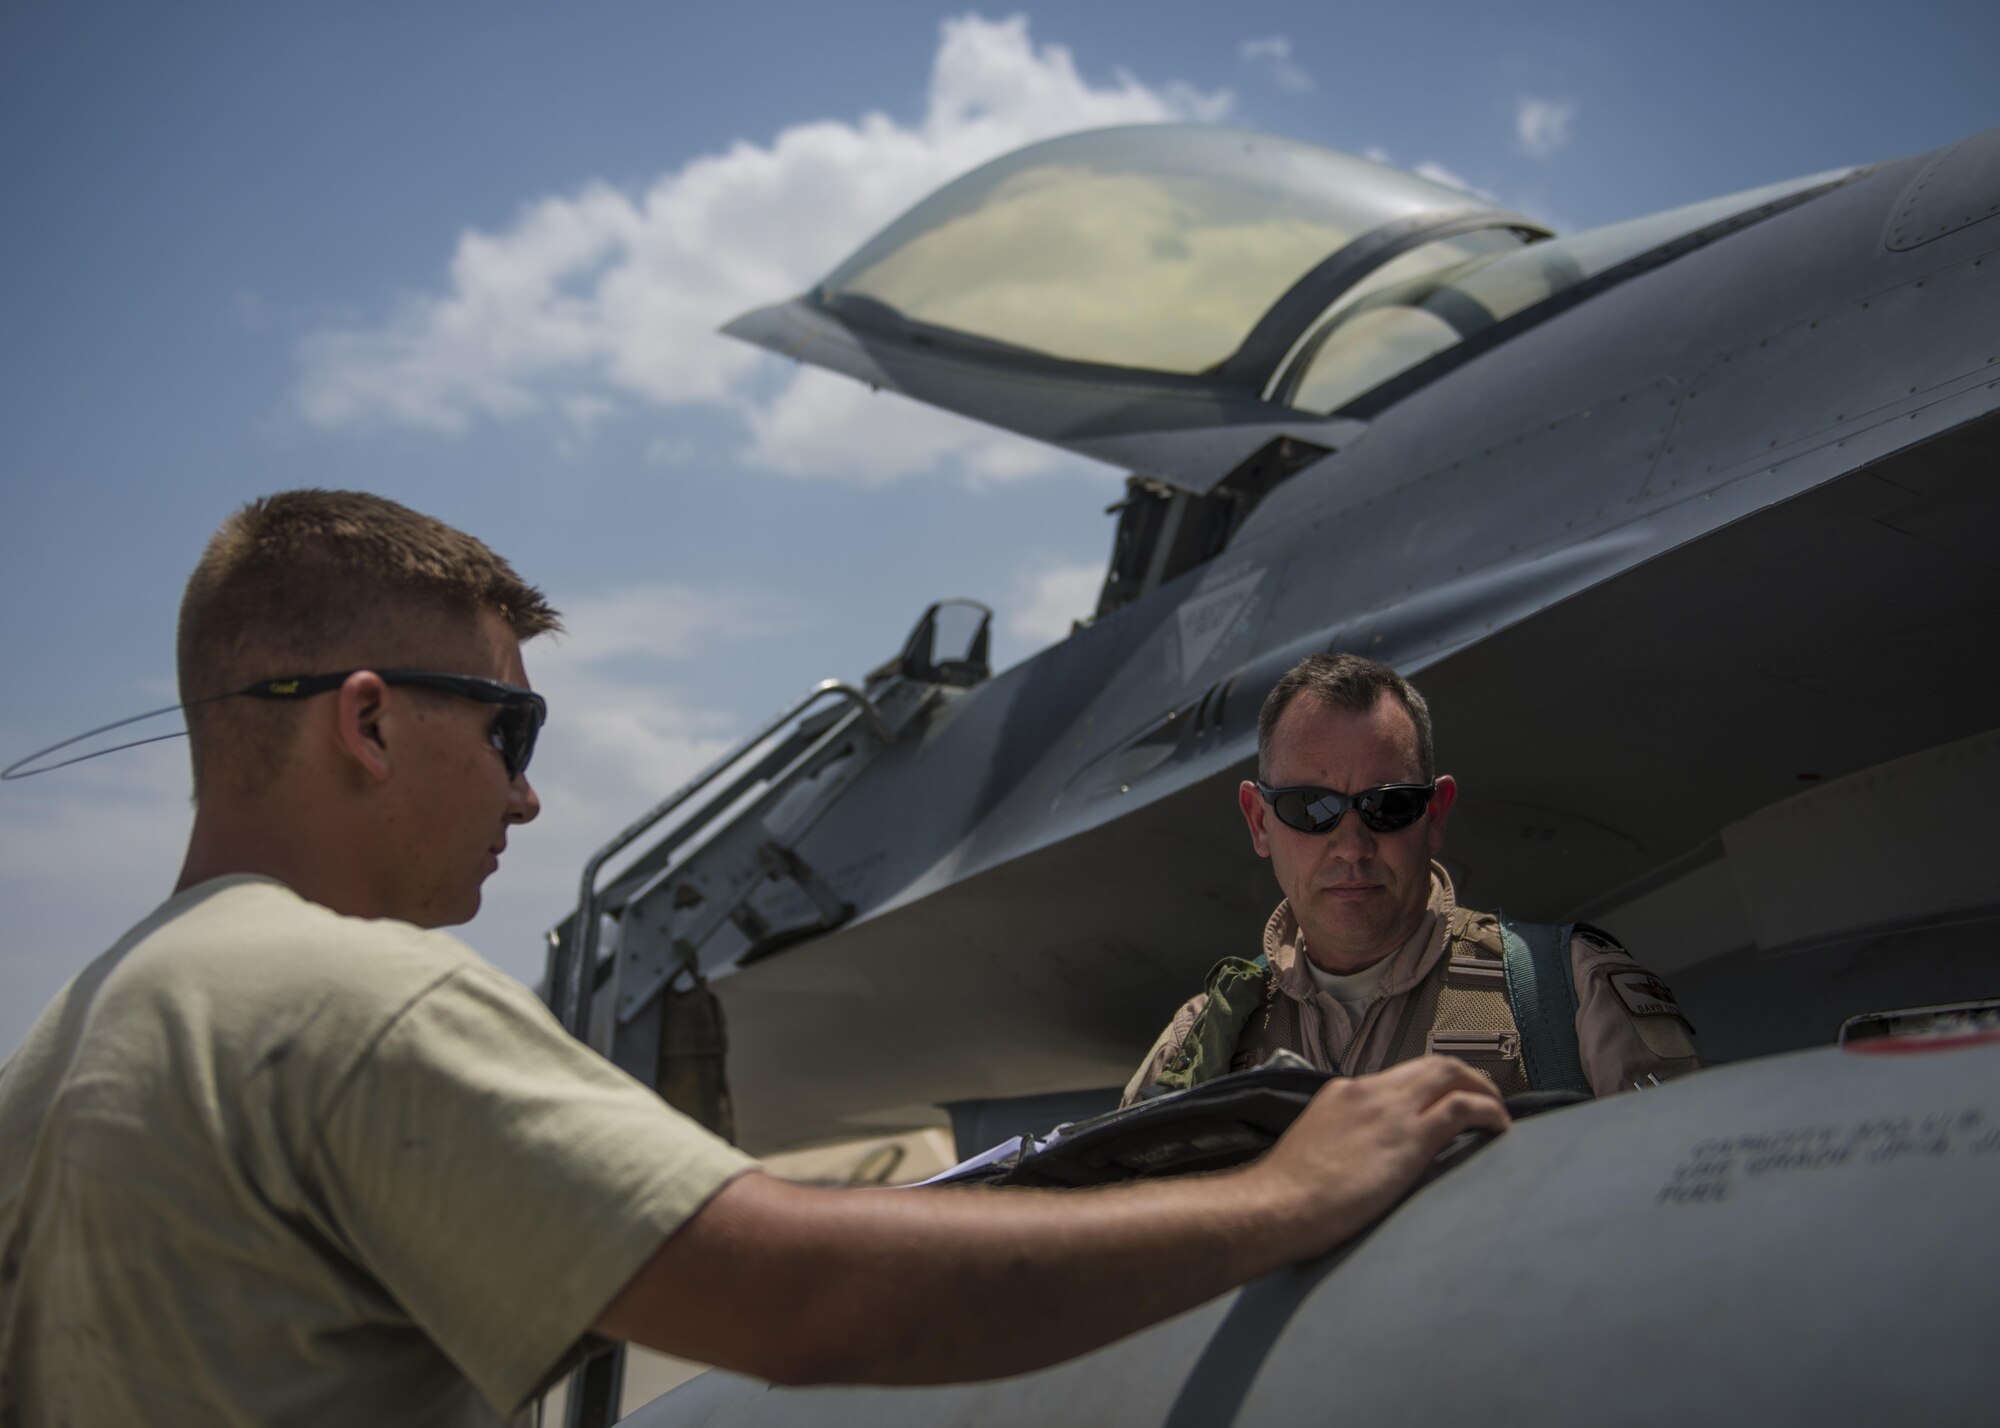 Lt. Col. David Efferson (right), 457th Expeditionary Fighter Squadron commander, and Senior Airman Brandon Hellin (left), 455th Expeditionary Maintenance Squadron crew chief, review an F-16C Fighting Falcon flight checklist, June 28, 2016, Bagram Airfield, Afghanistan. The F-16C is a compact, multi-role fighter aircraft that is highly maneuverable in air-to-air combat and air-to-surface attacks. (U.S. Air Force photo by Senior Airman Justyn M. Freeman)